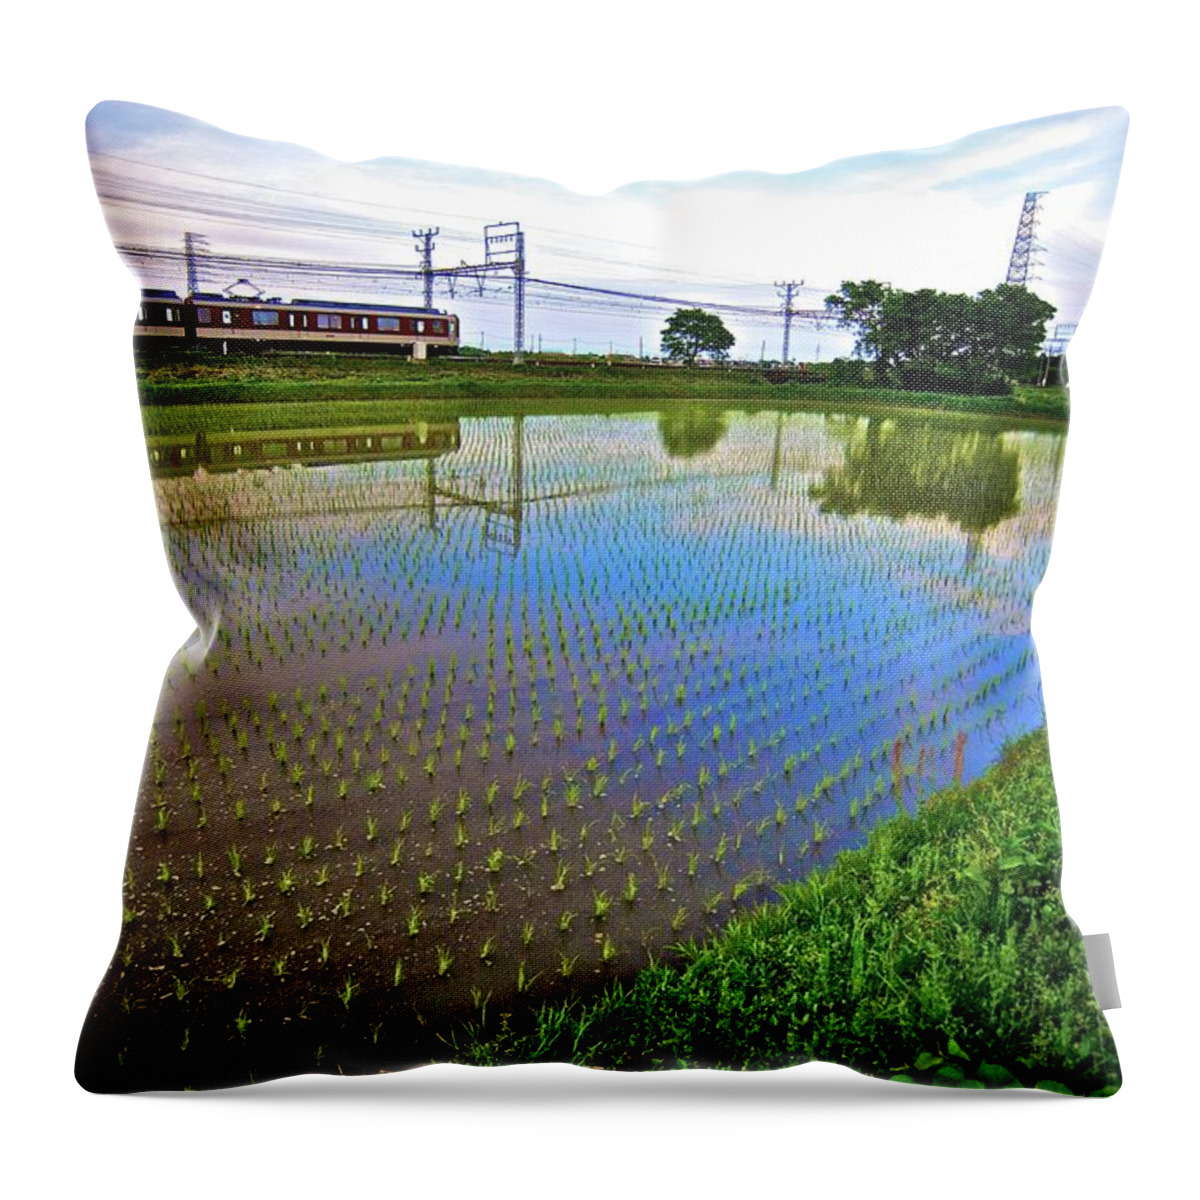 Scenics Throw Pillow featuring the photograph Train Passing By A Rice Field In Rural by Jake Jung